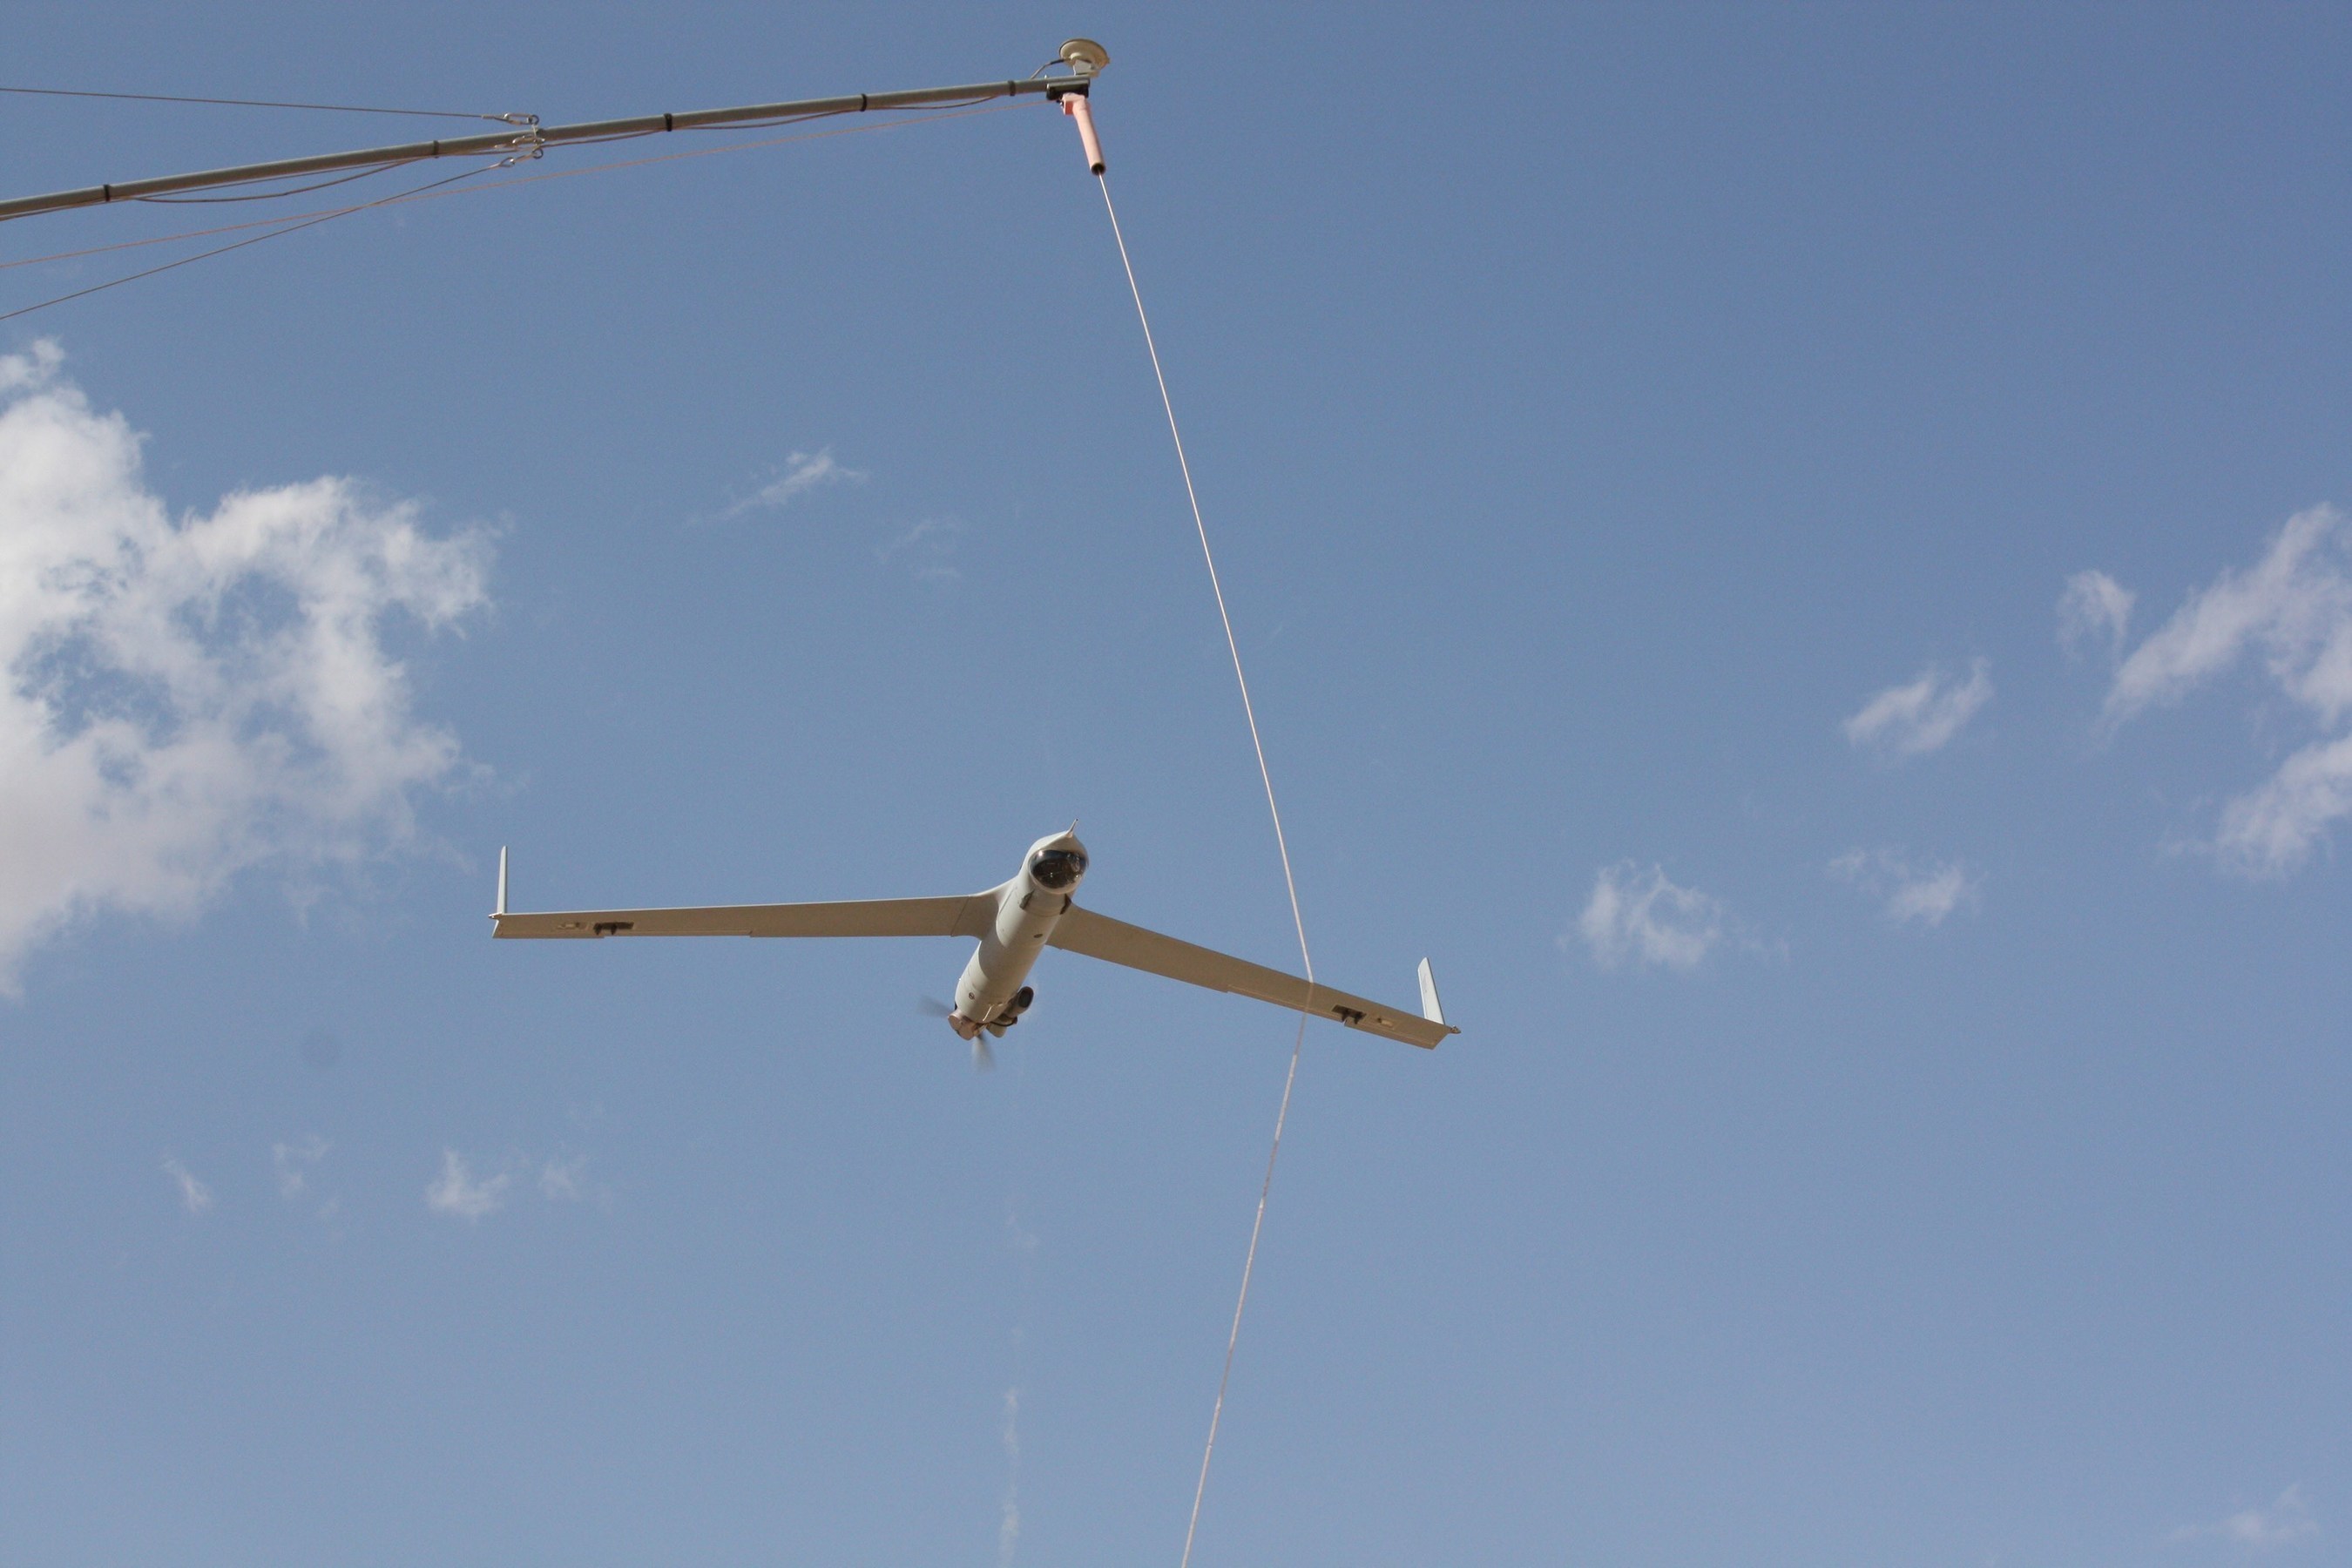 Insitu Pacific ScanEagle on recovery using SkyHook retrieval system